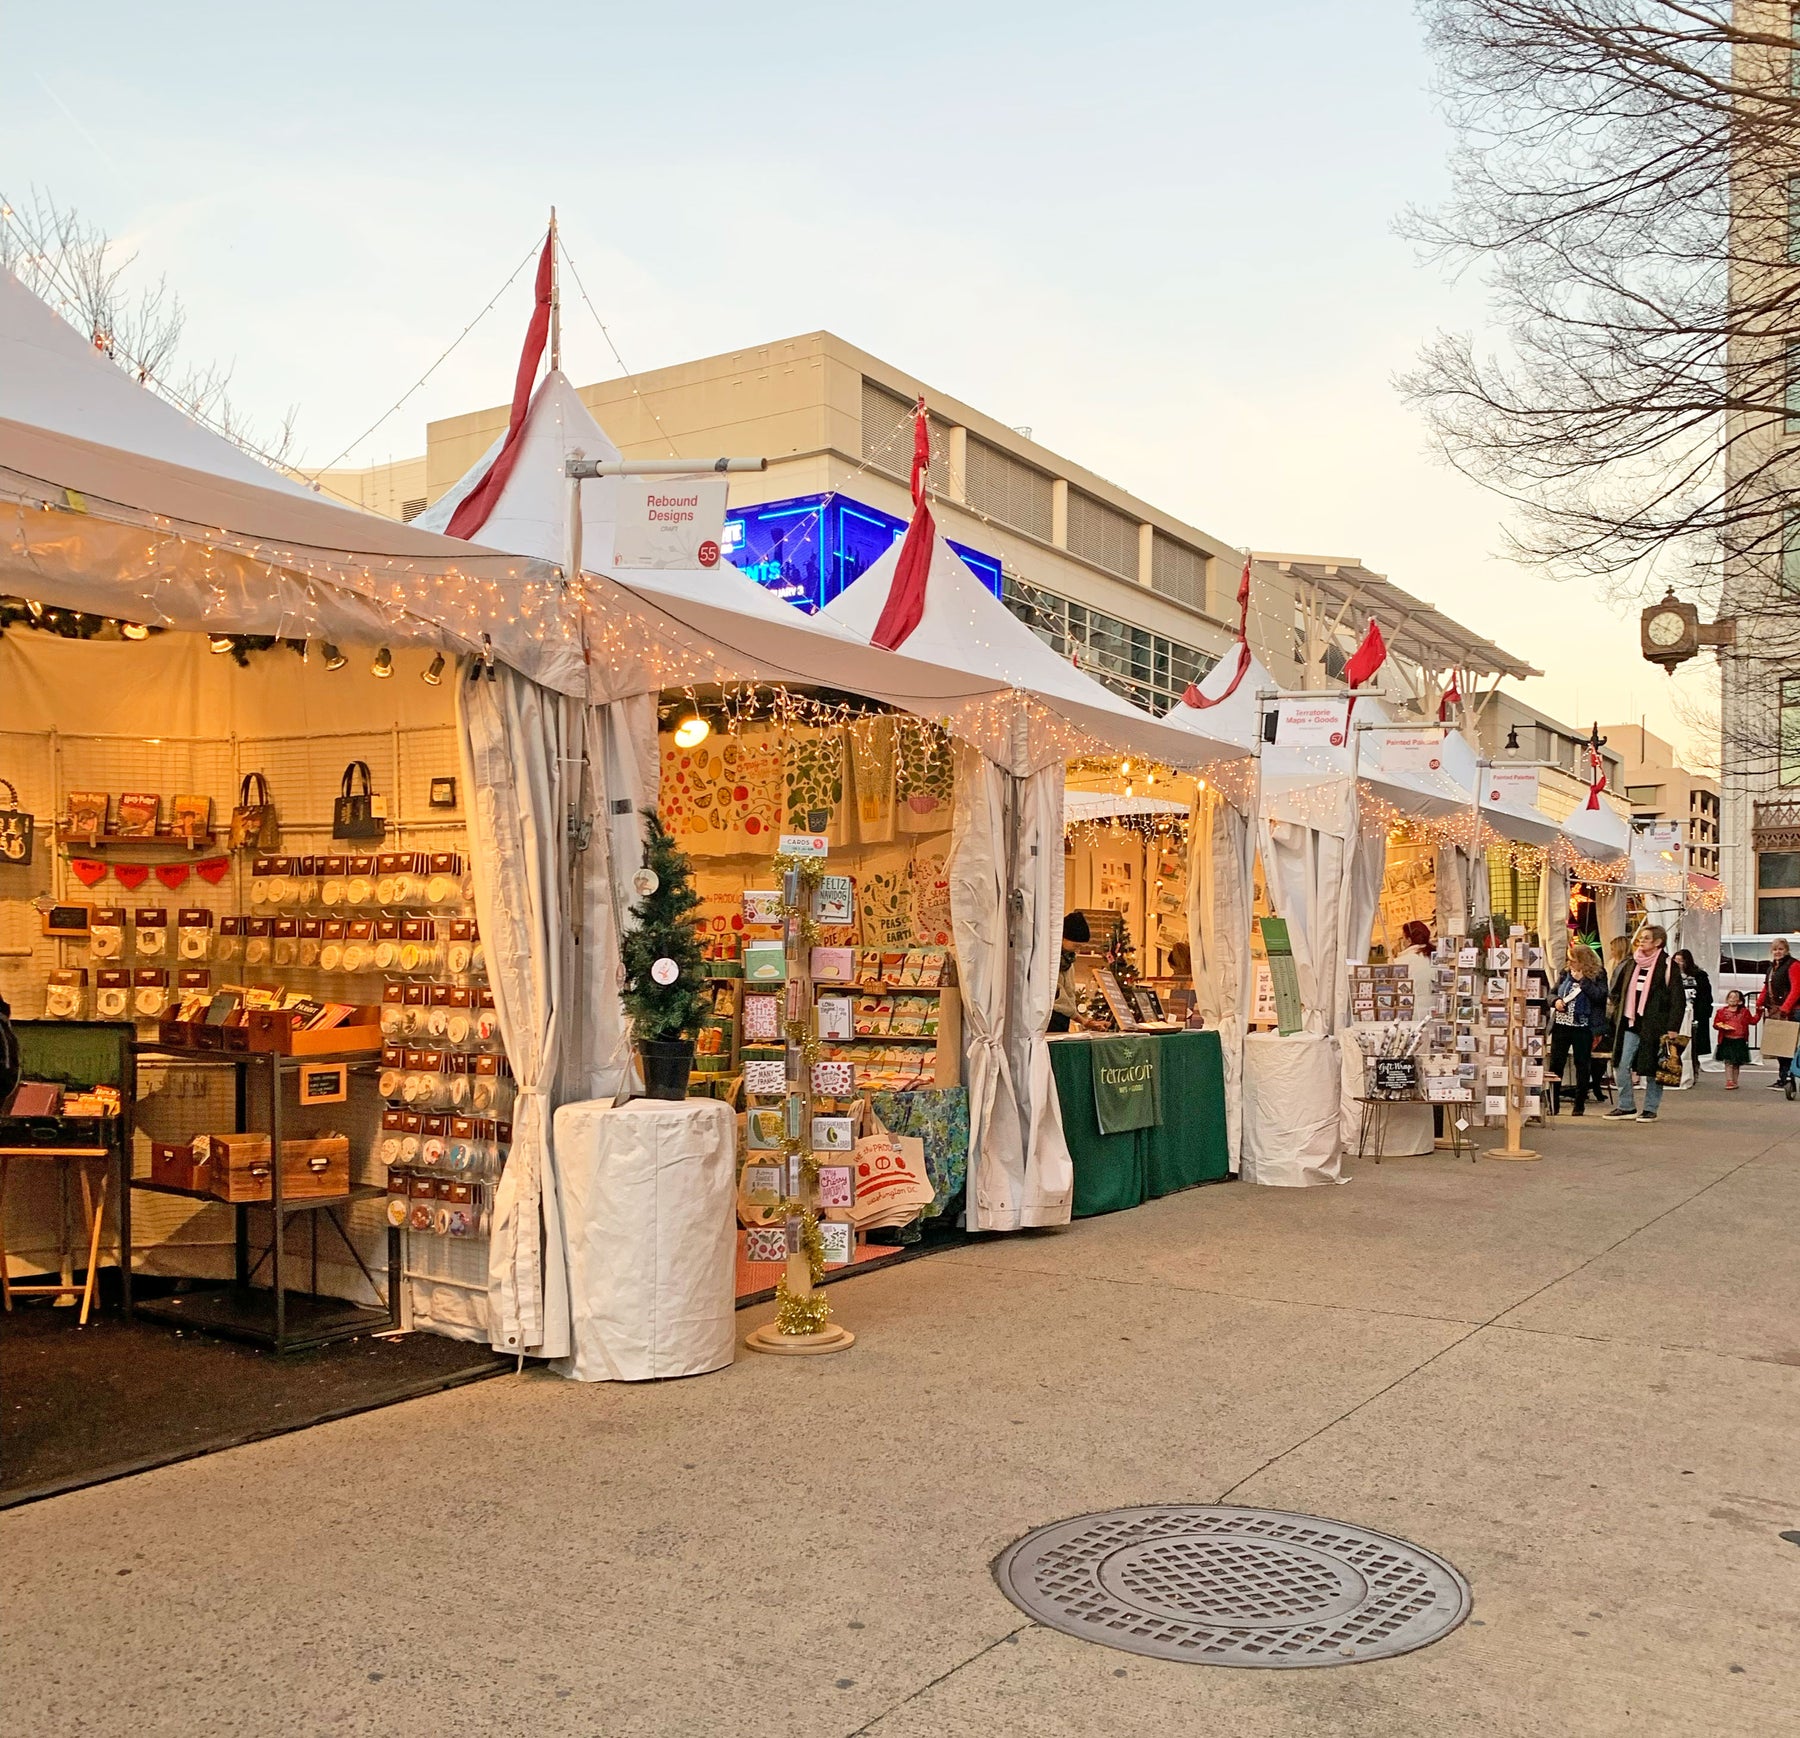 Downtown Holiday Market Reminds Us to Shop Small